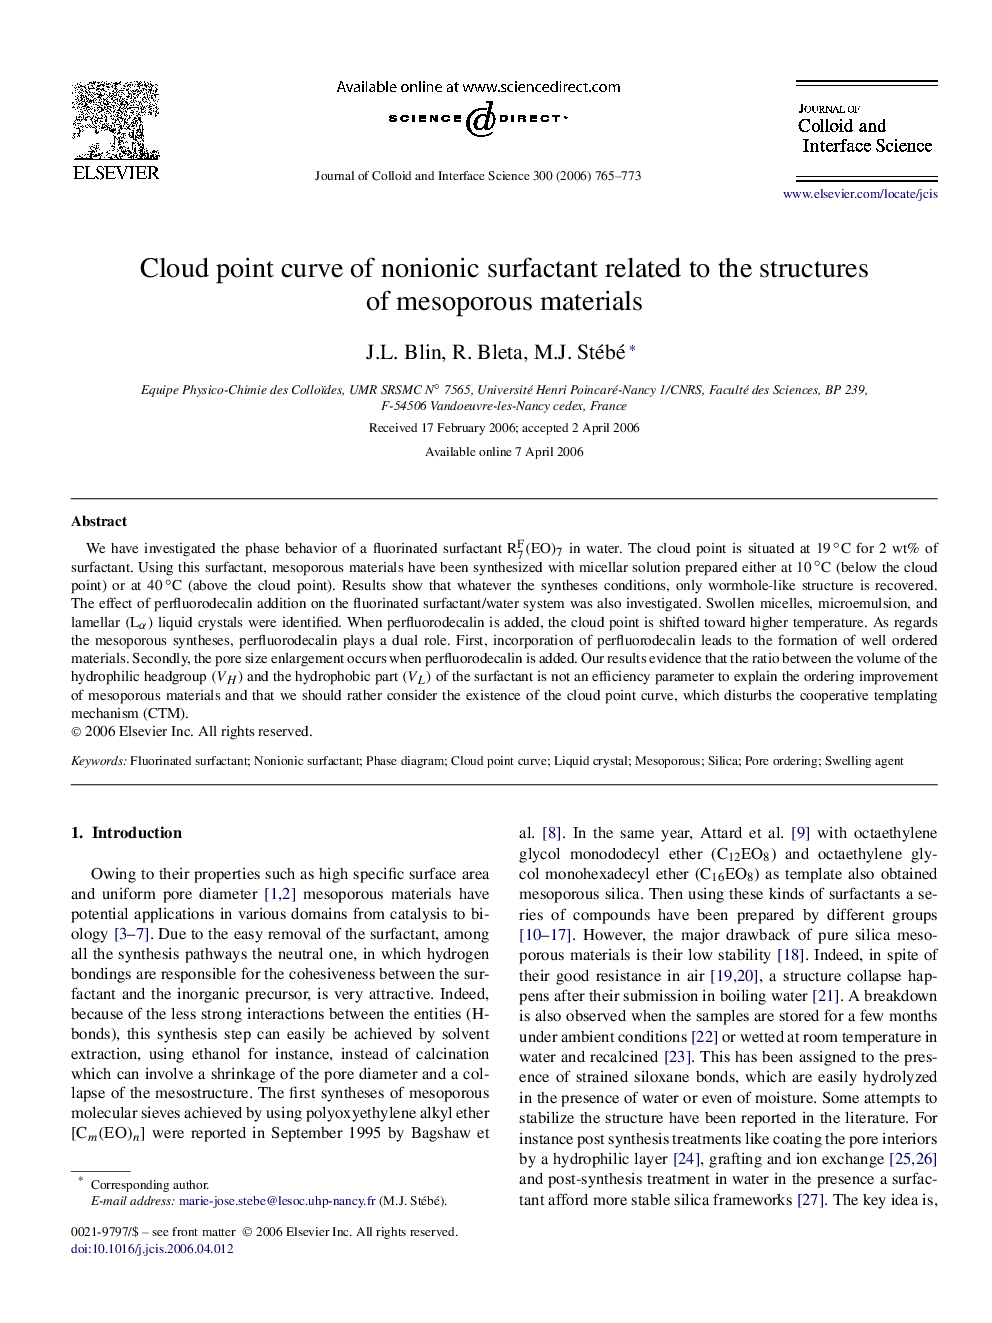 Cloud point curve of nonionic surfactant related to the structures of mesoporous materials